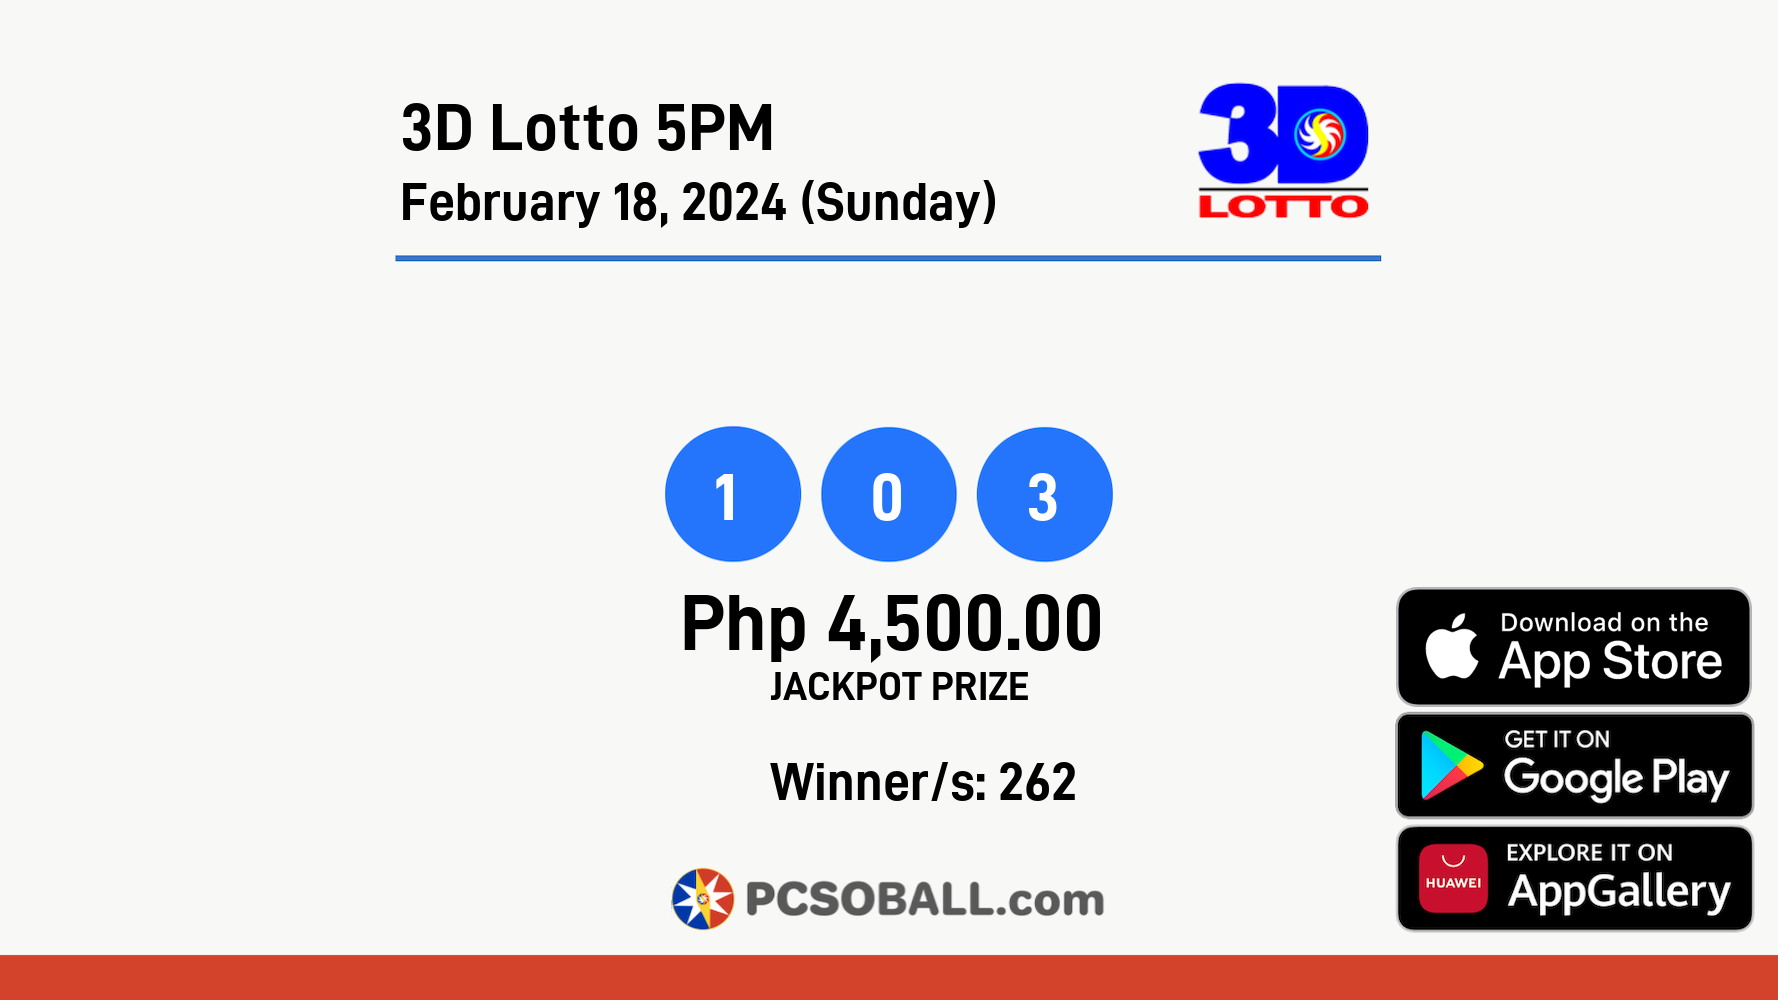 3D Lotto 5PM February 18, 2024 (Sunday) Result